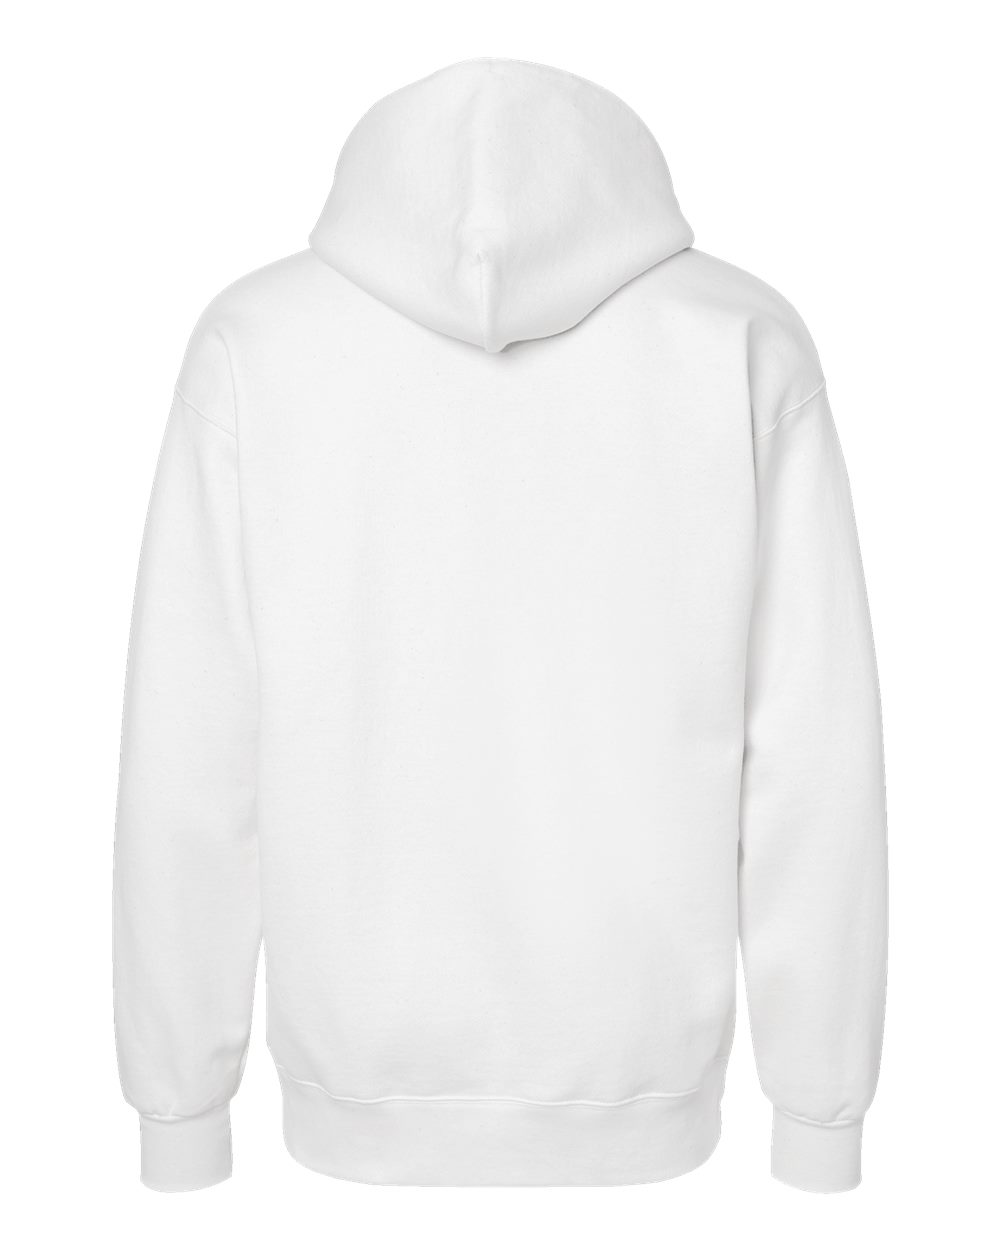 Ultimate Cotton Pullover Hooded Sweatshirt 